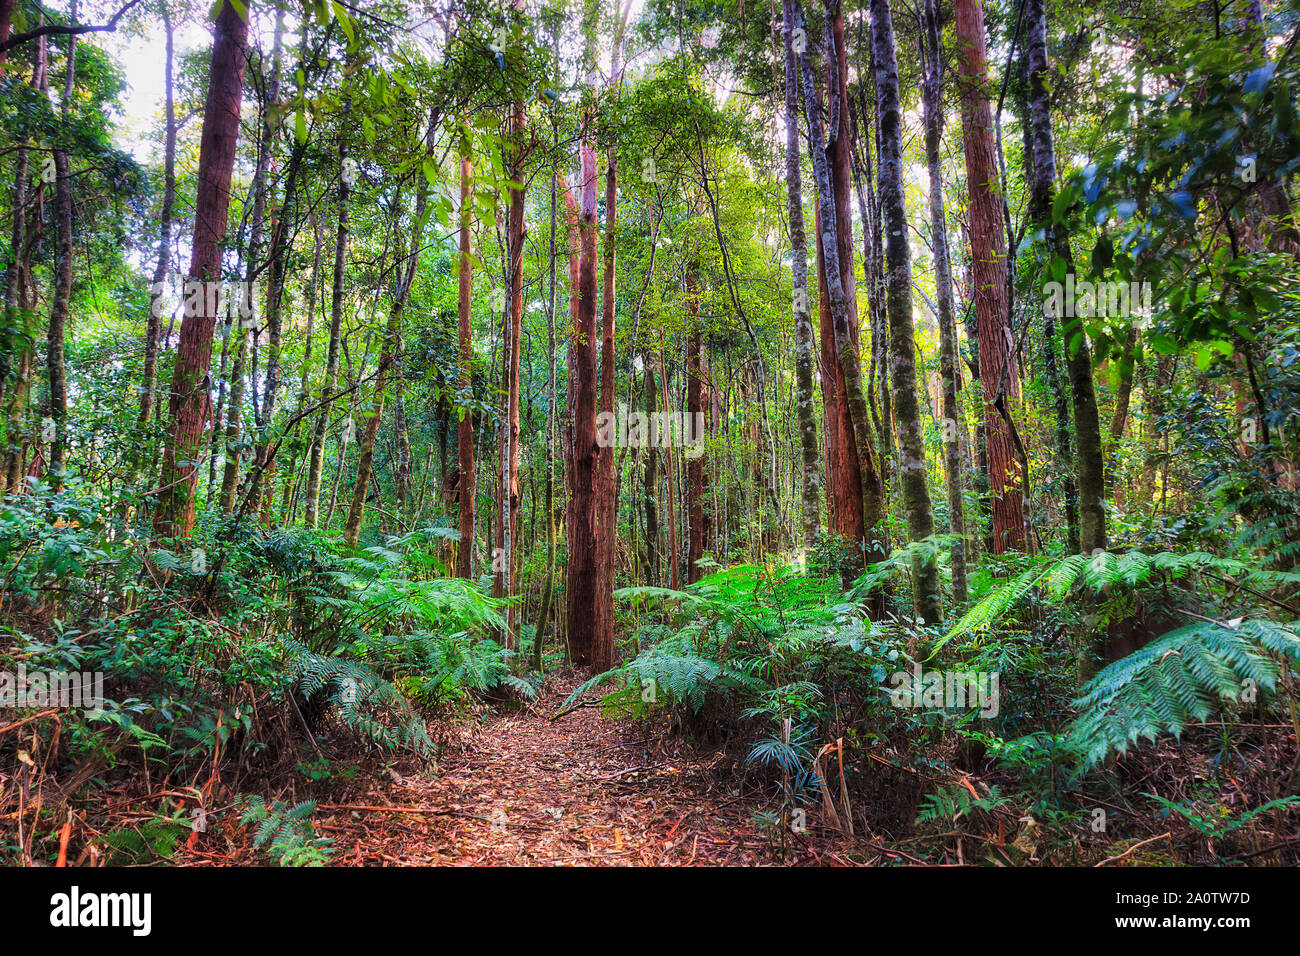 Hiking track deep in gum tree woods of Dorrigo National park between tall evergreen tree trunks and ferns - endemic nature of Australian continent. Stock Photo